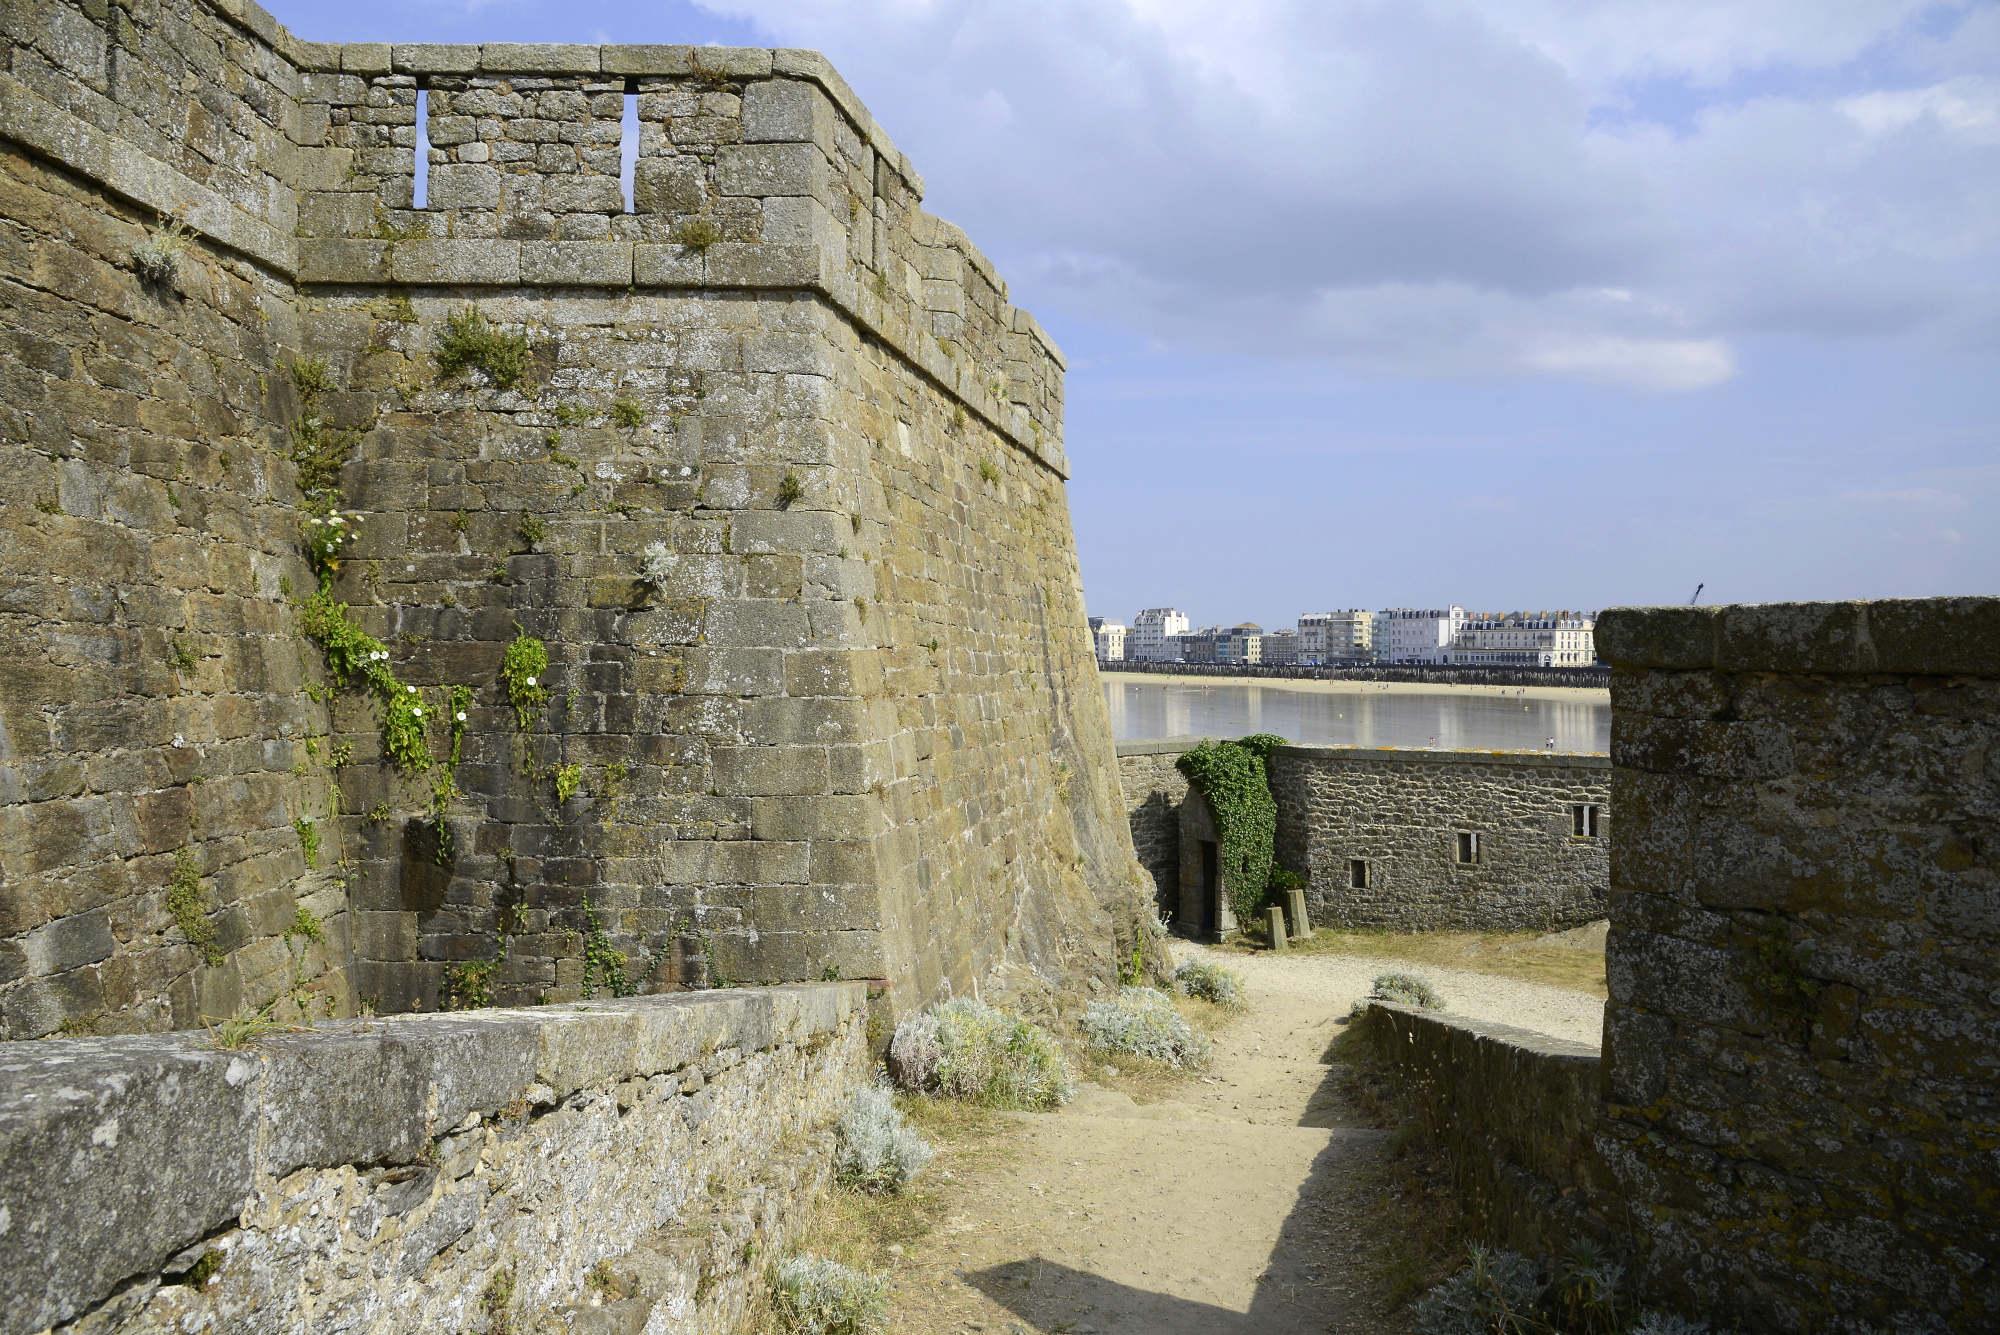 St Malo - City Wall | Saint-Malo | Pictures | France in Global-Geography